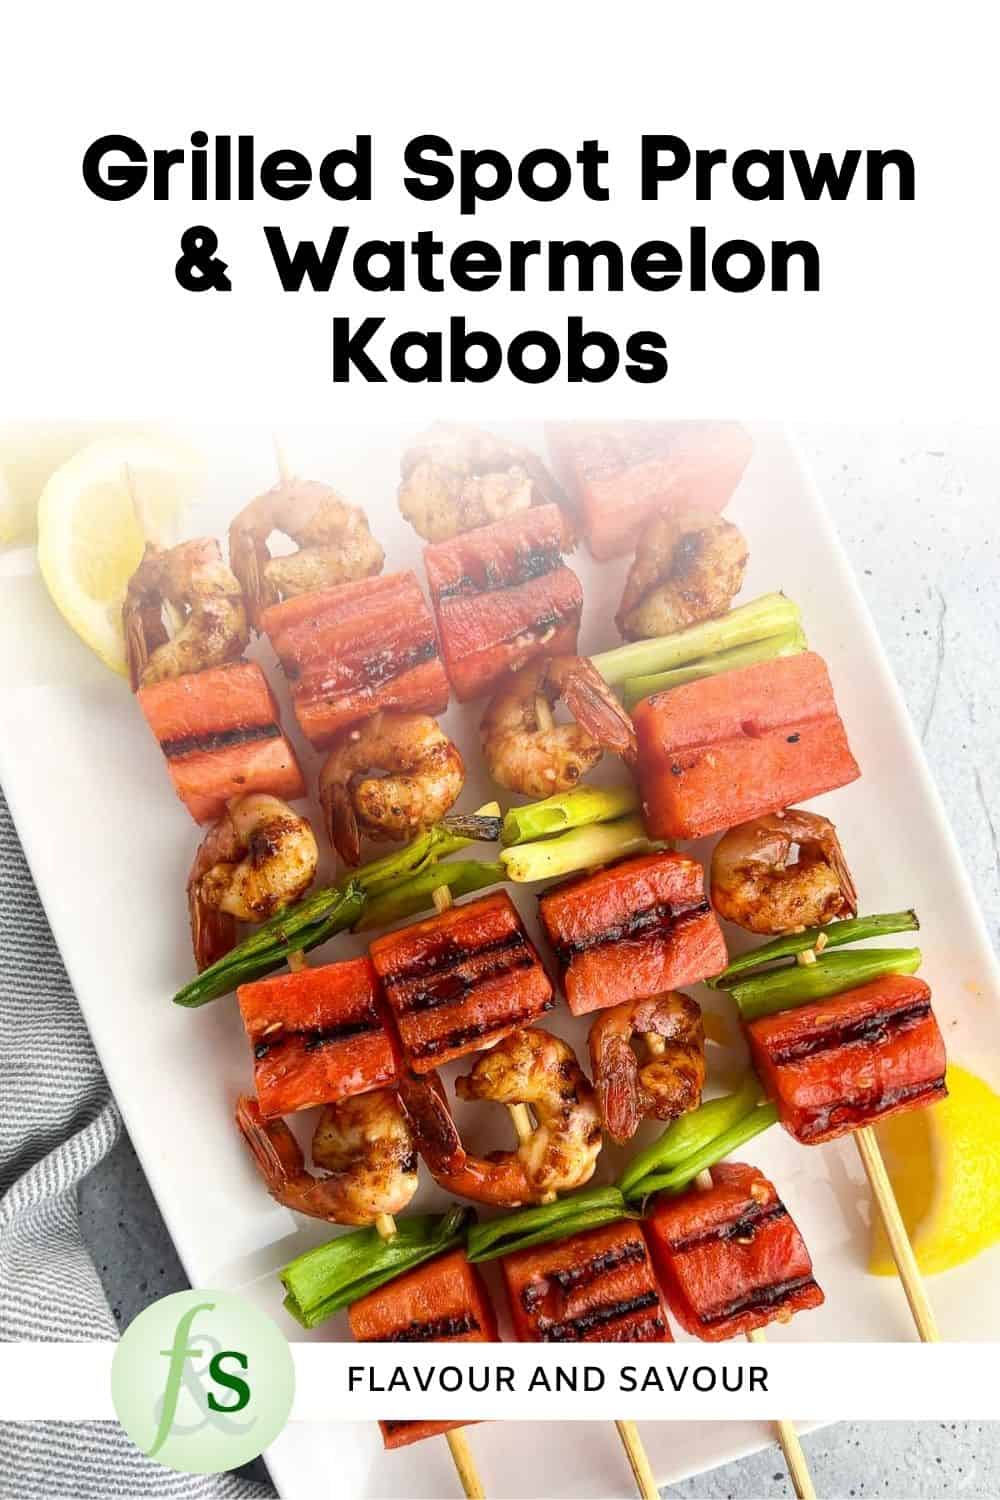 Image with text overlay for Grilled Spot Prawn and Watermelon Kabobs.